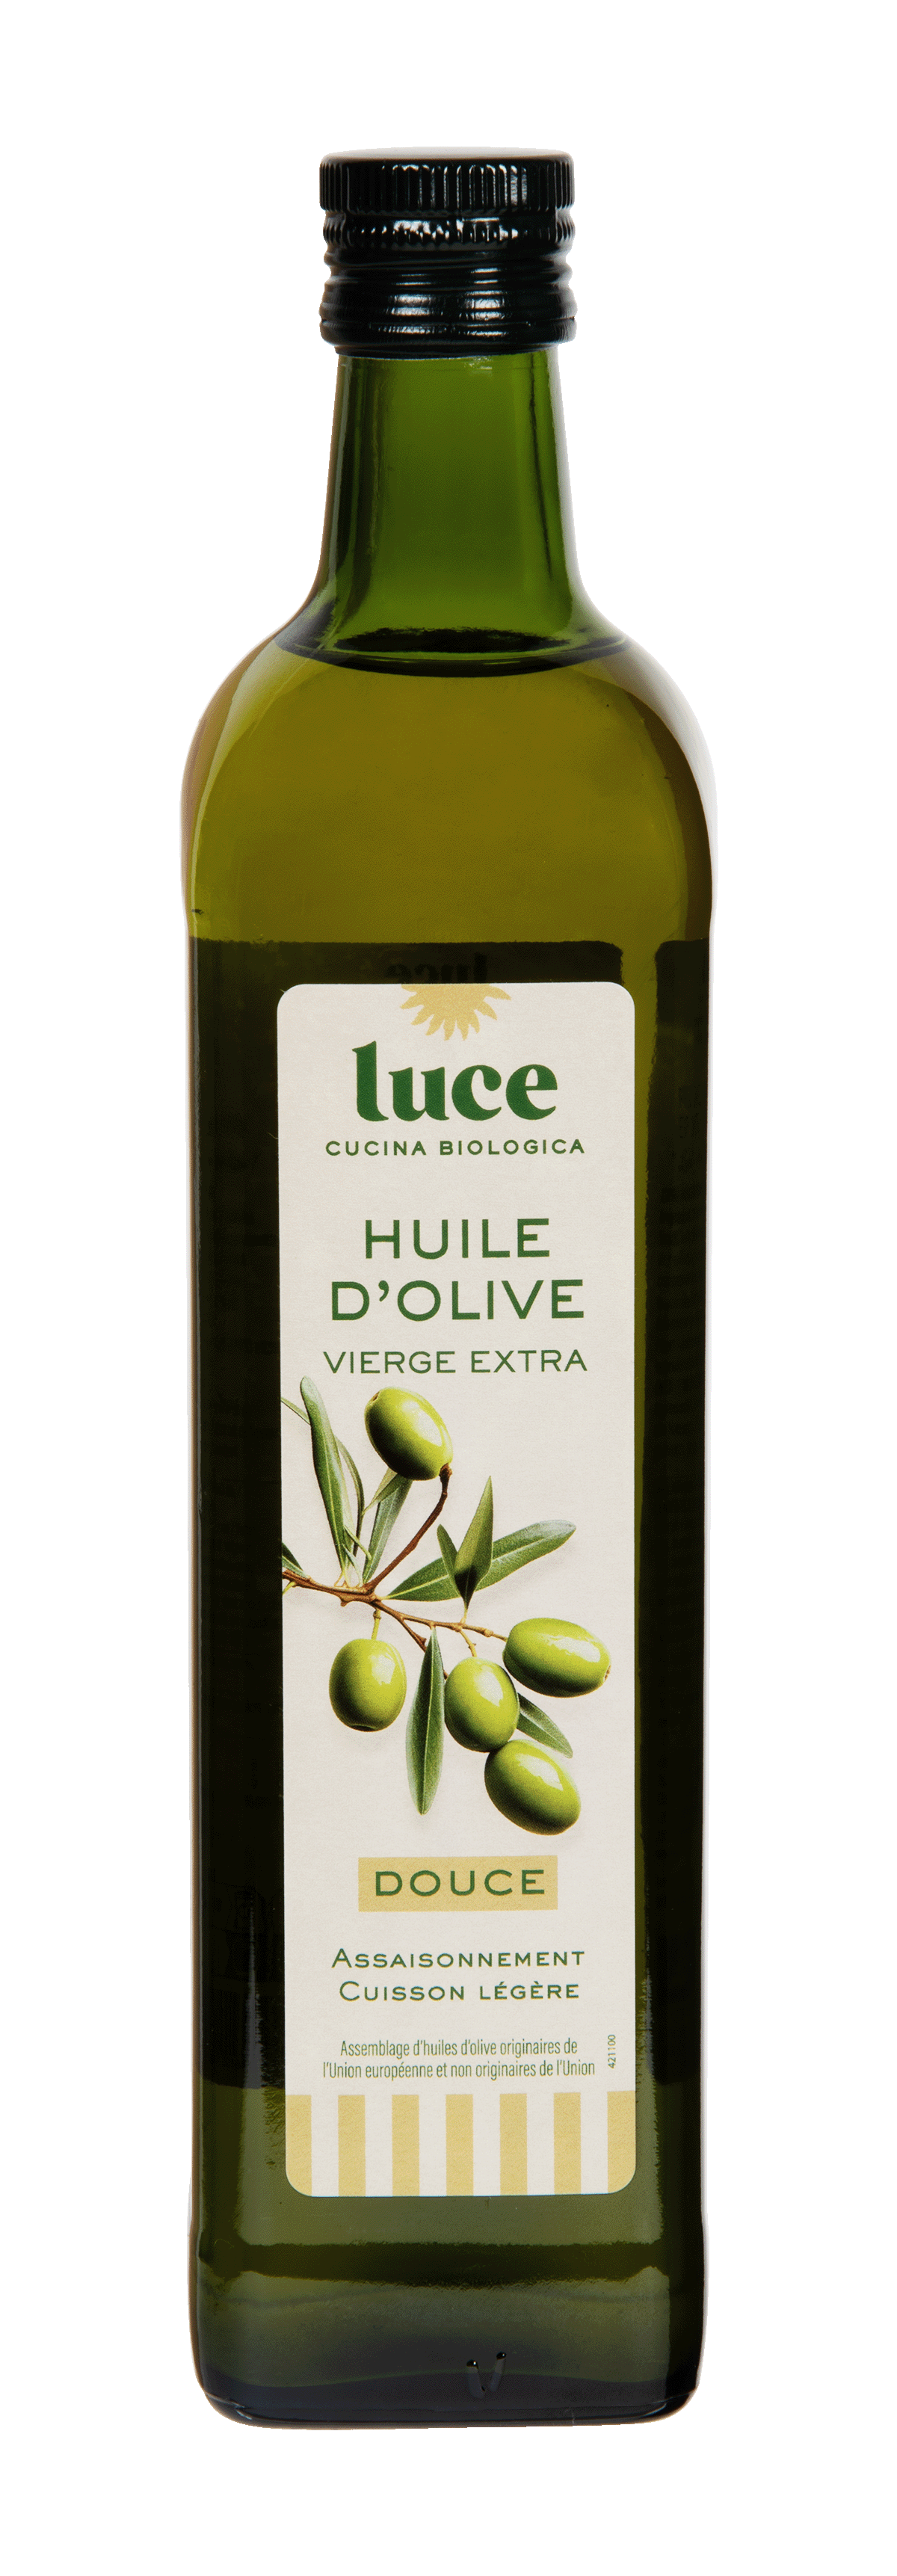 Huile d'olive vierge extra douce